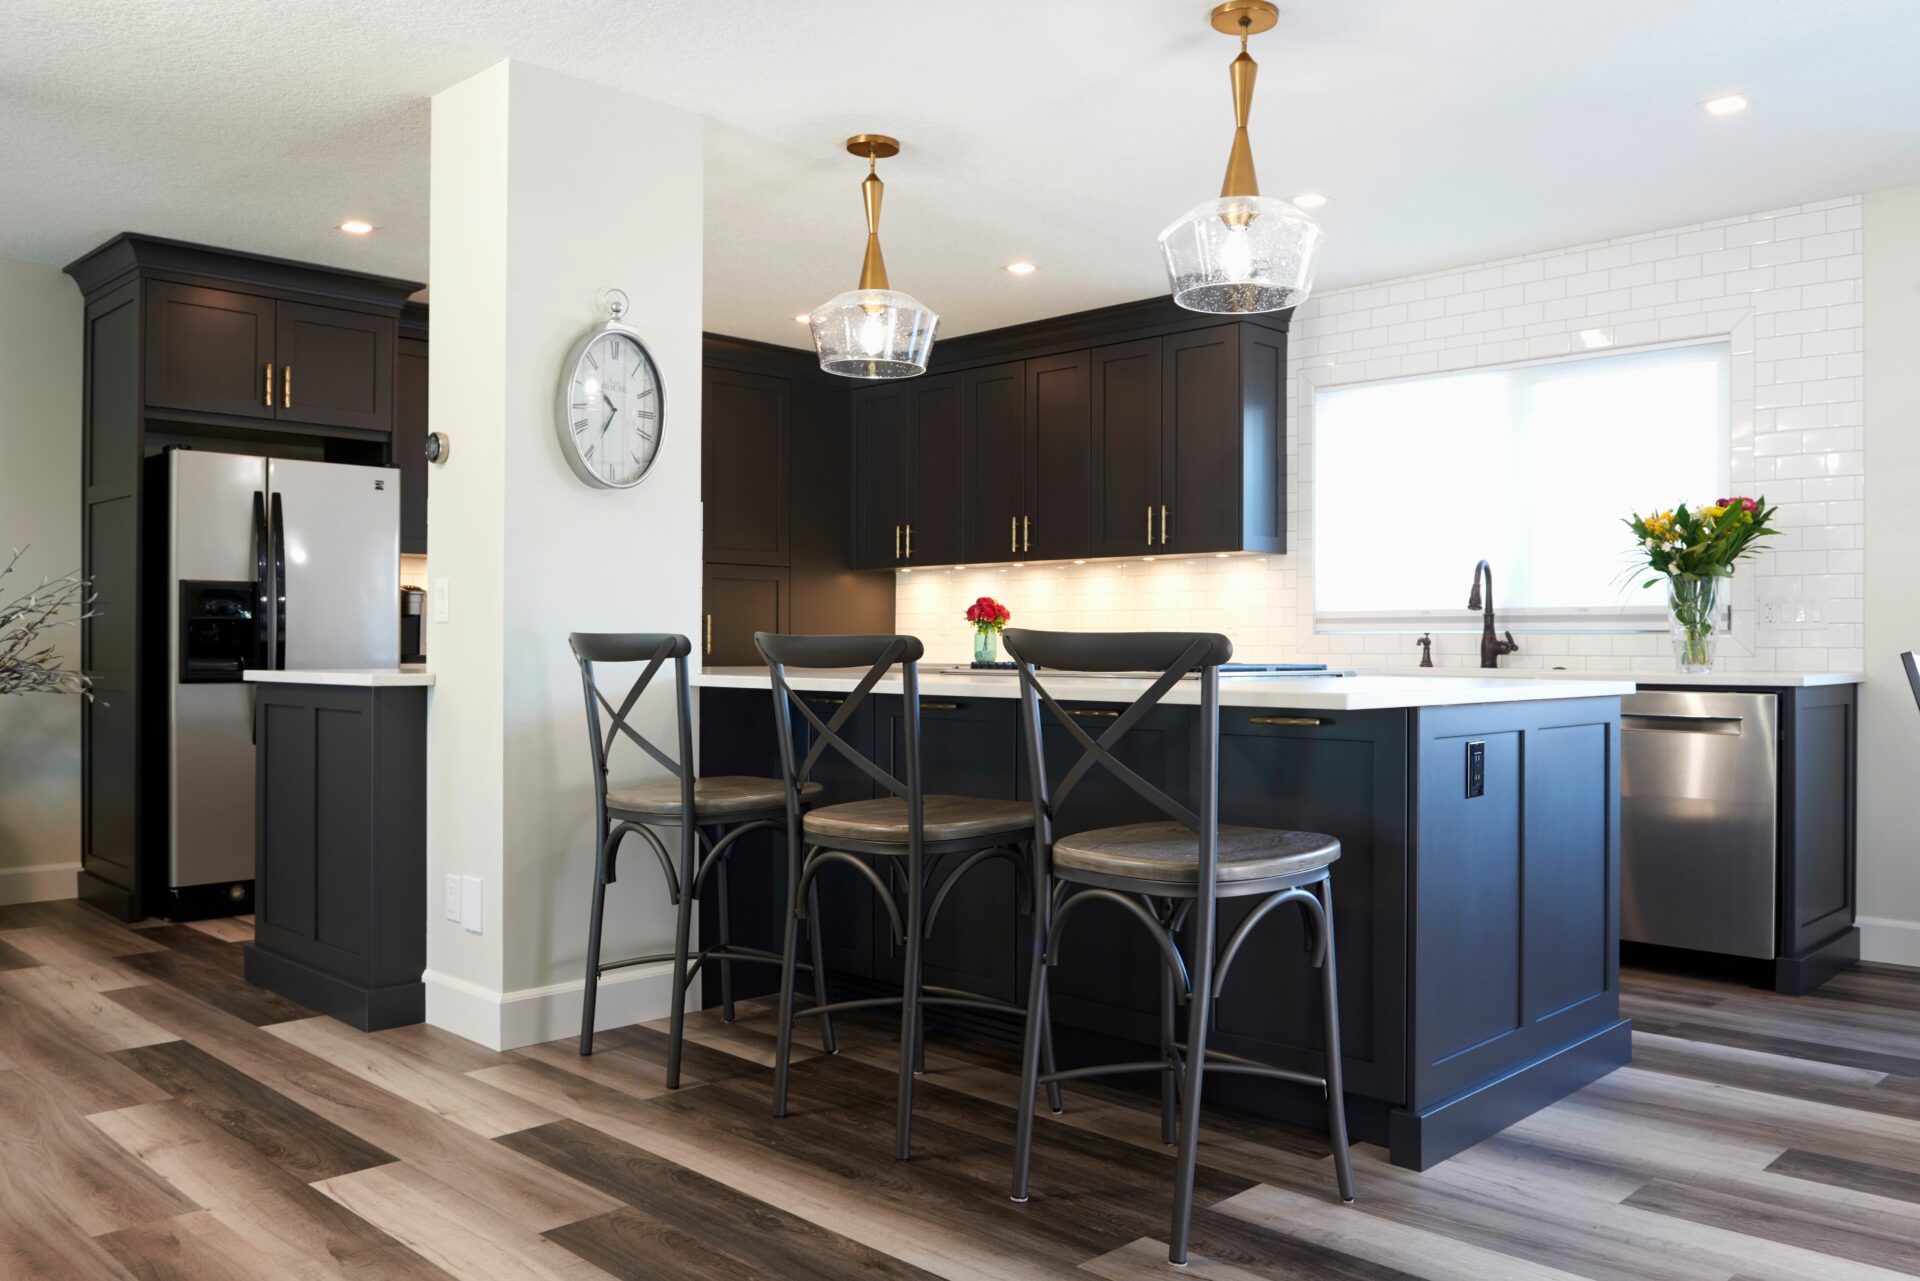 A kitchen with black cabinets and white walls.